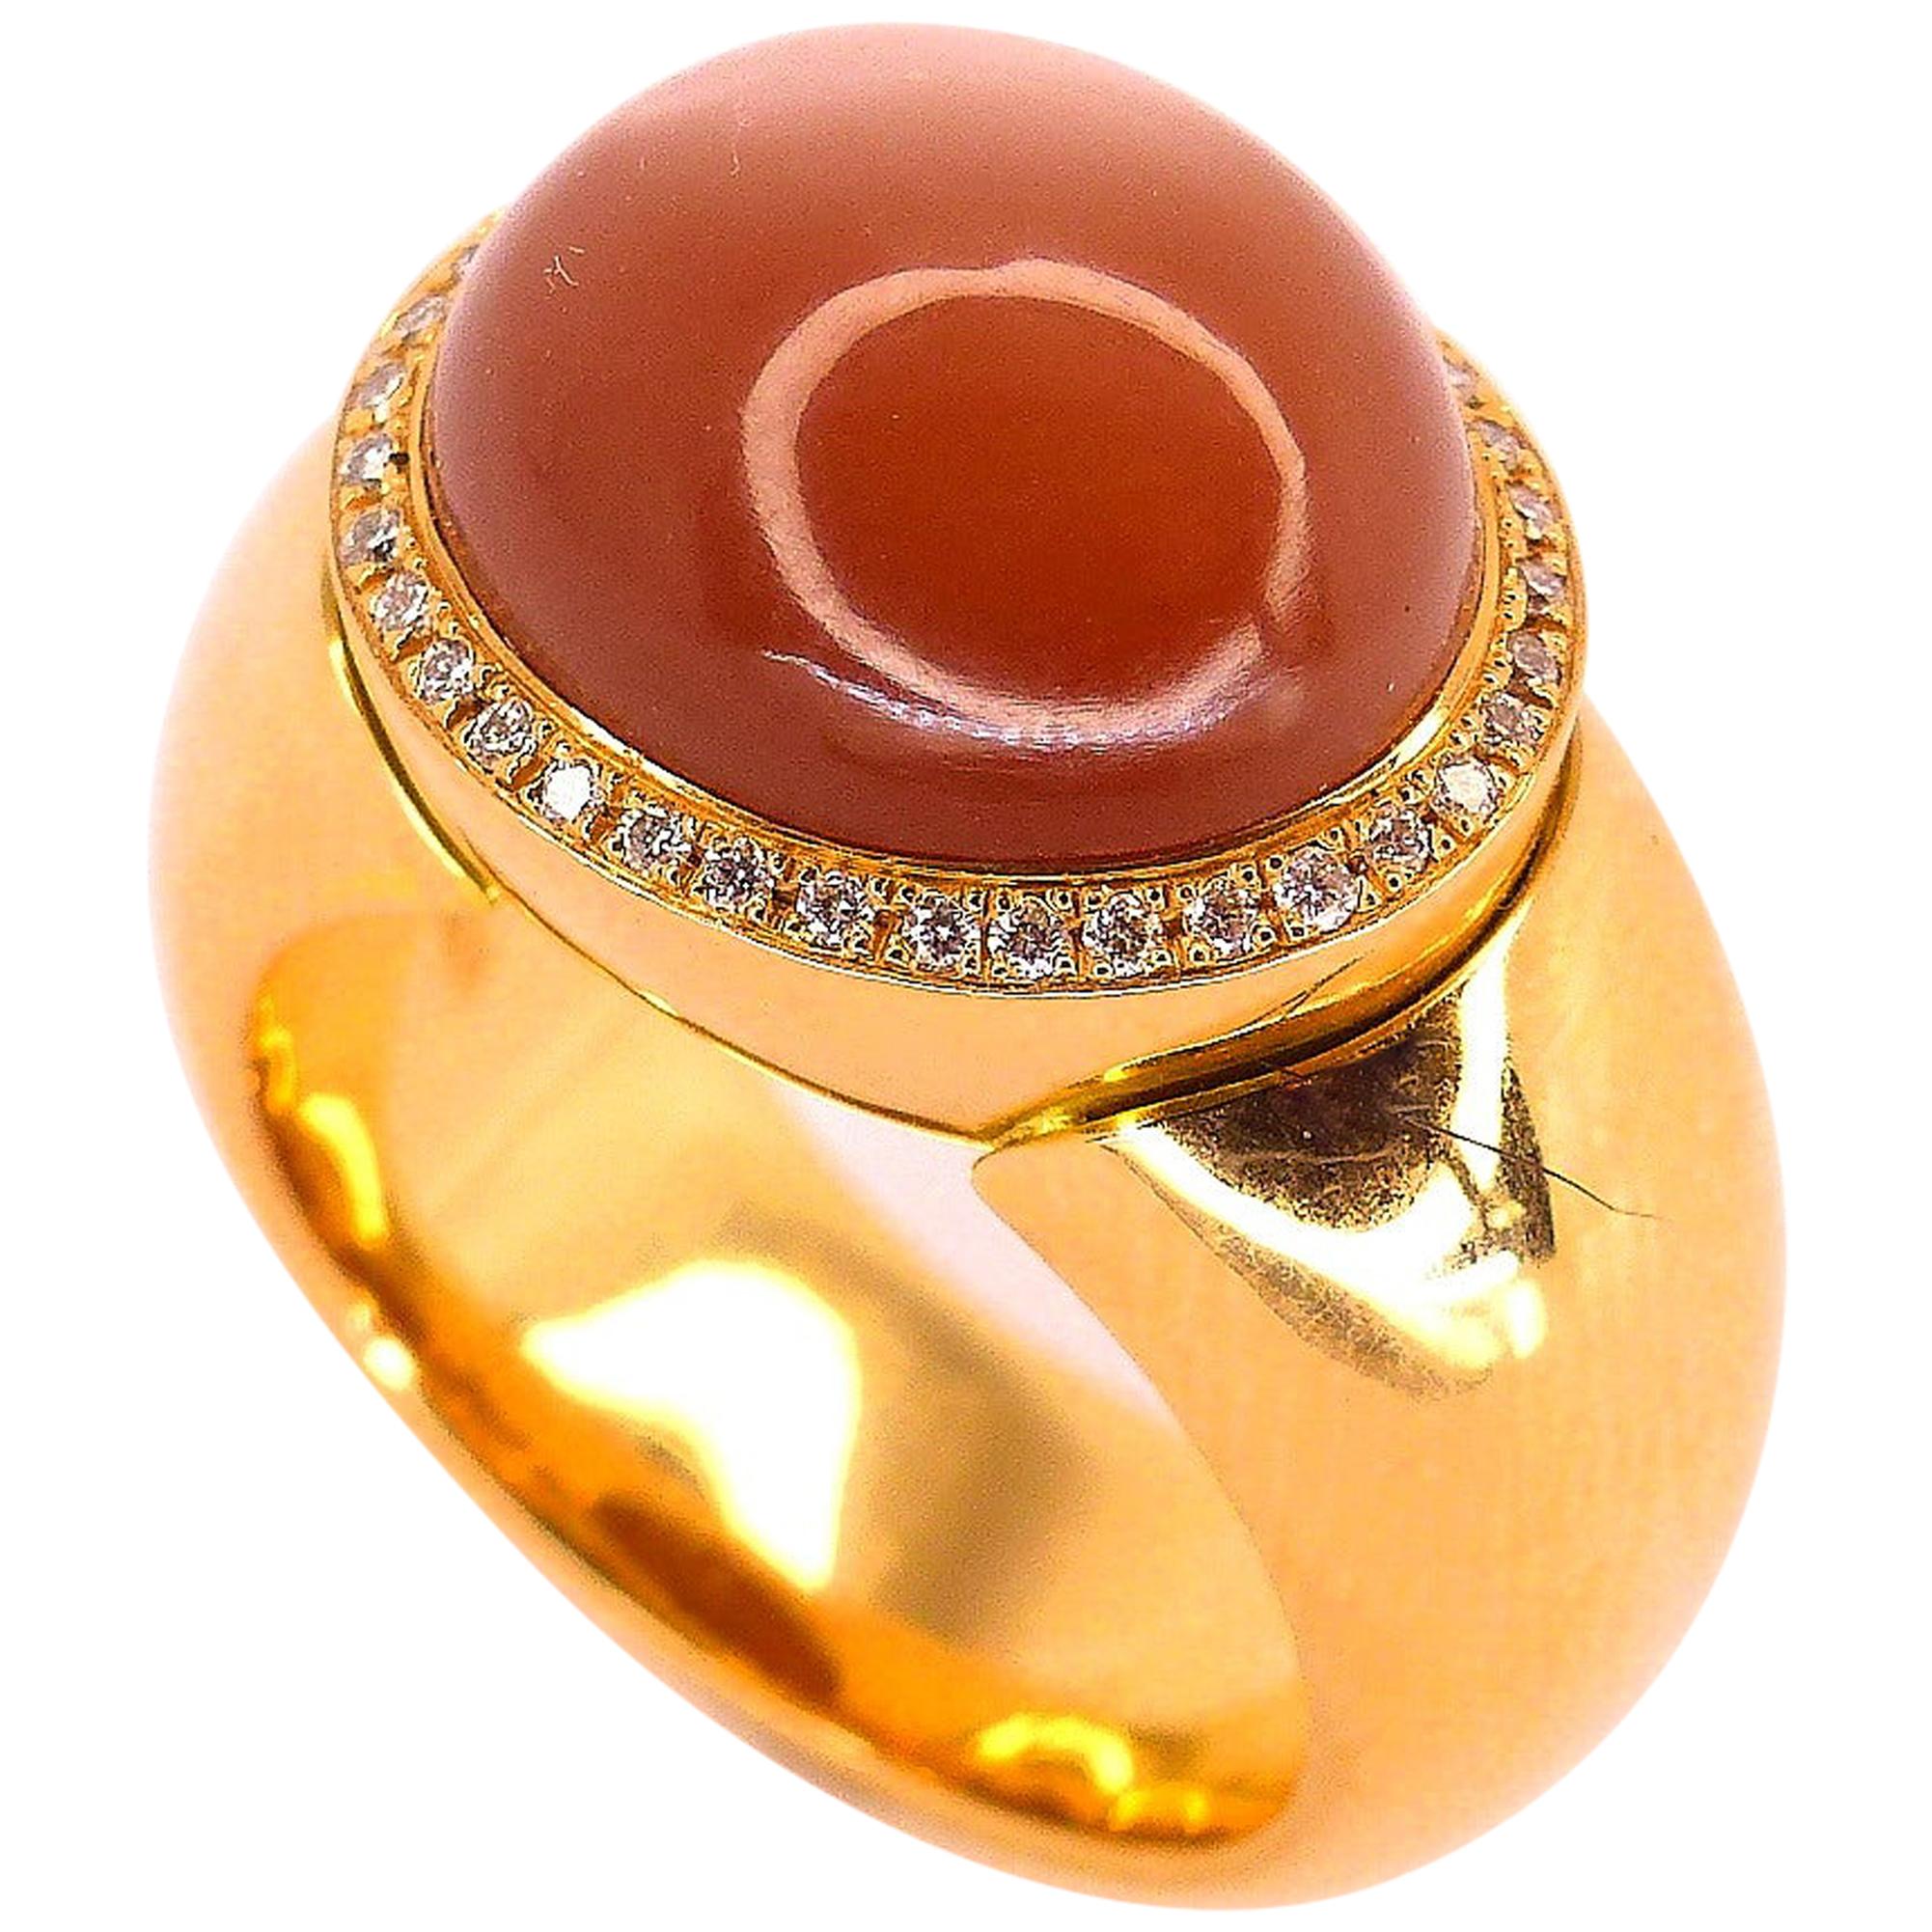  Ring in Rose Gold with 1 Brown Moonstone Oval 14x12mm and 42 Diamonds. For Sale